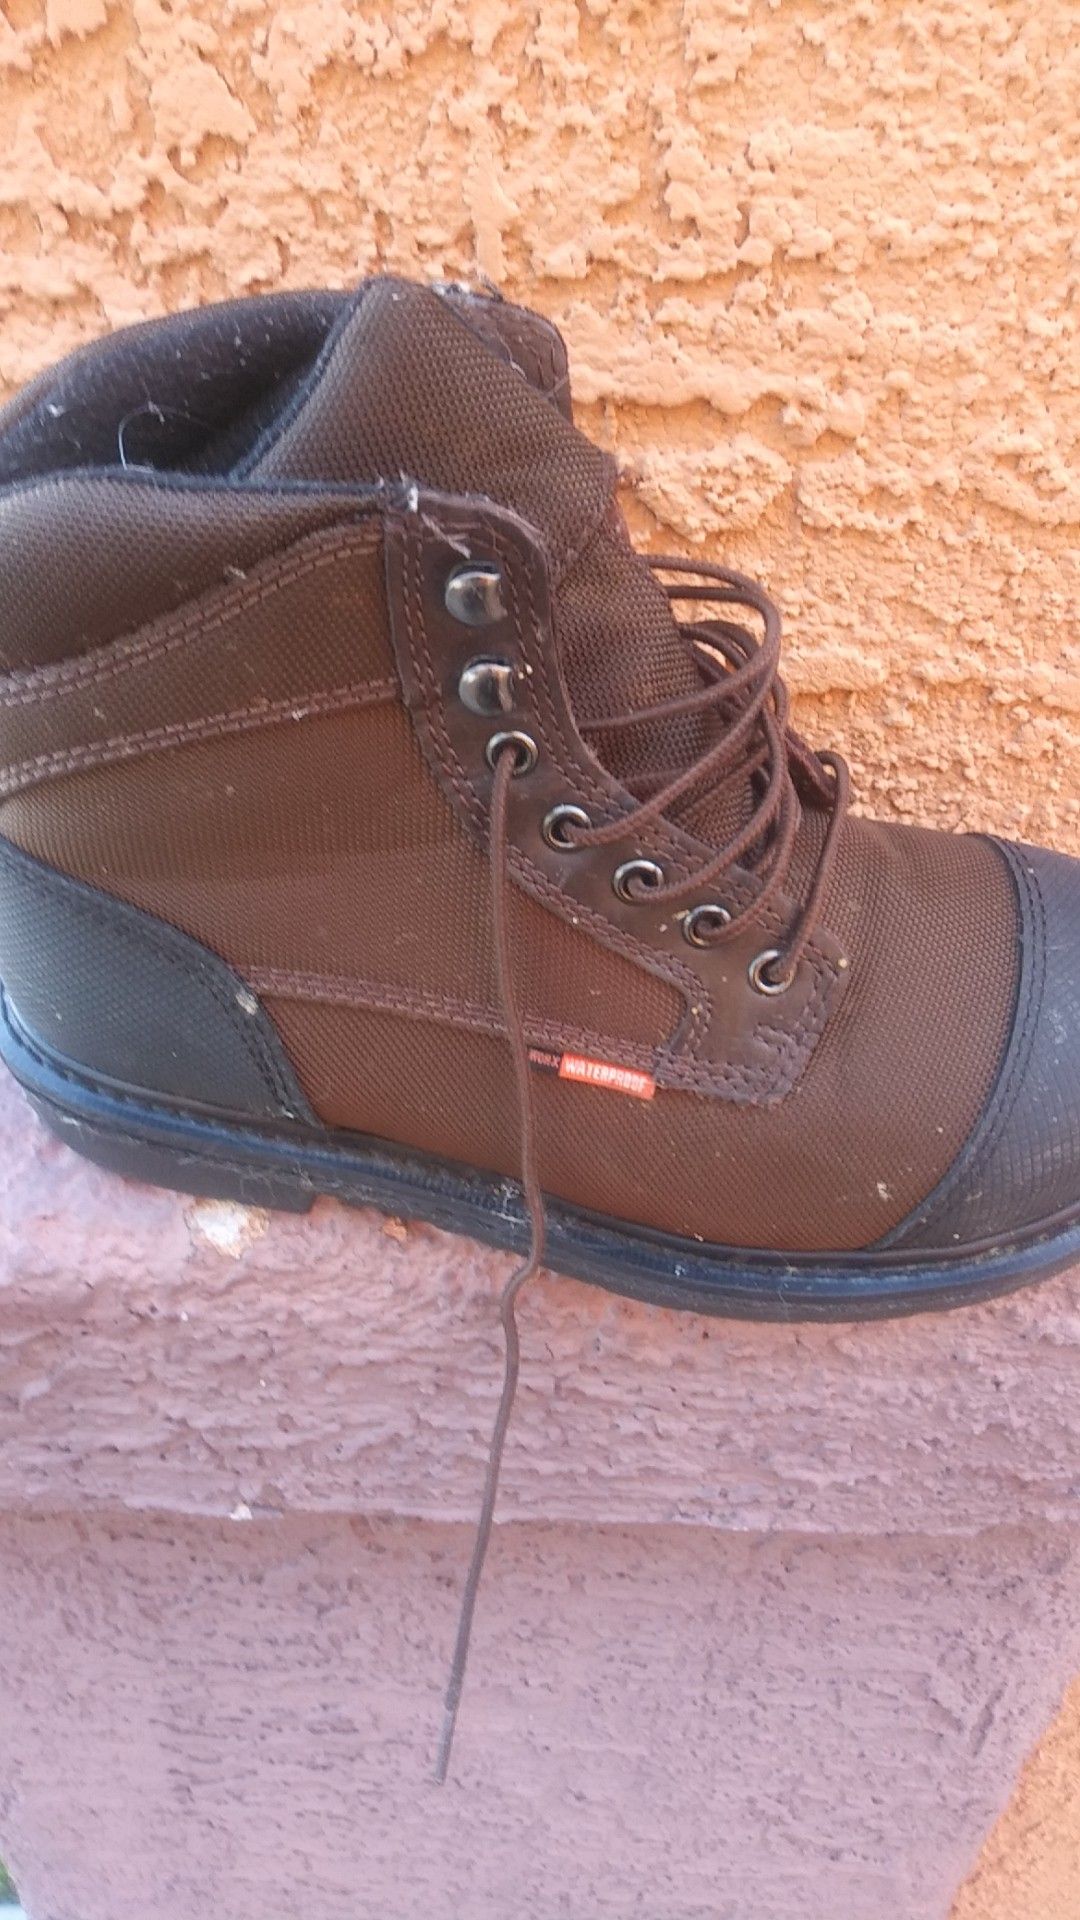 Steel toes work boots for sale never been use!!!